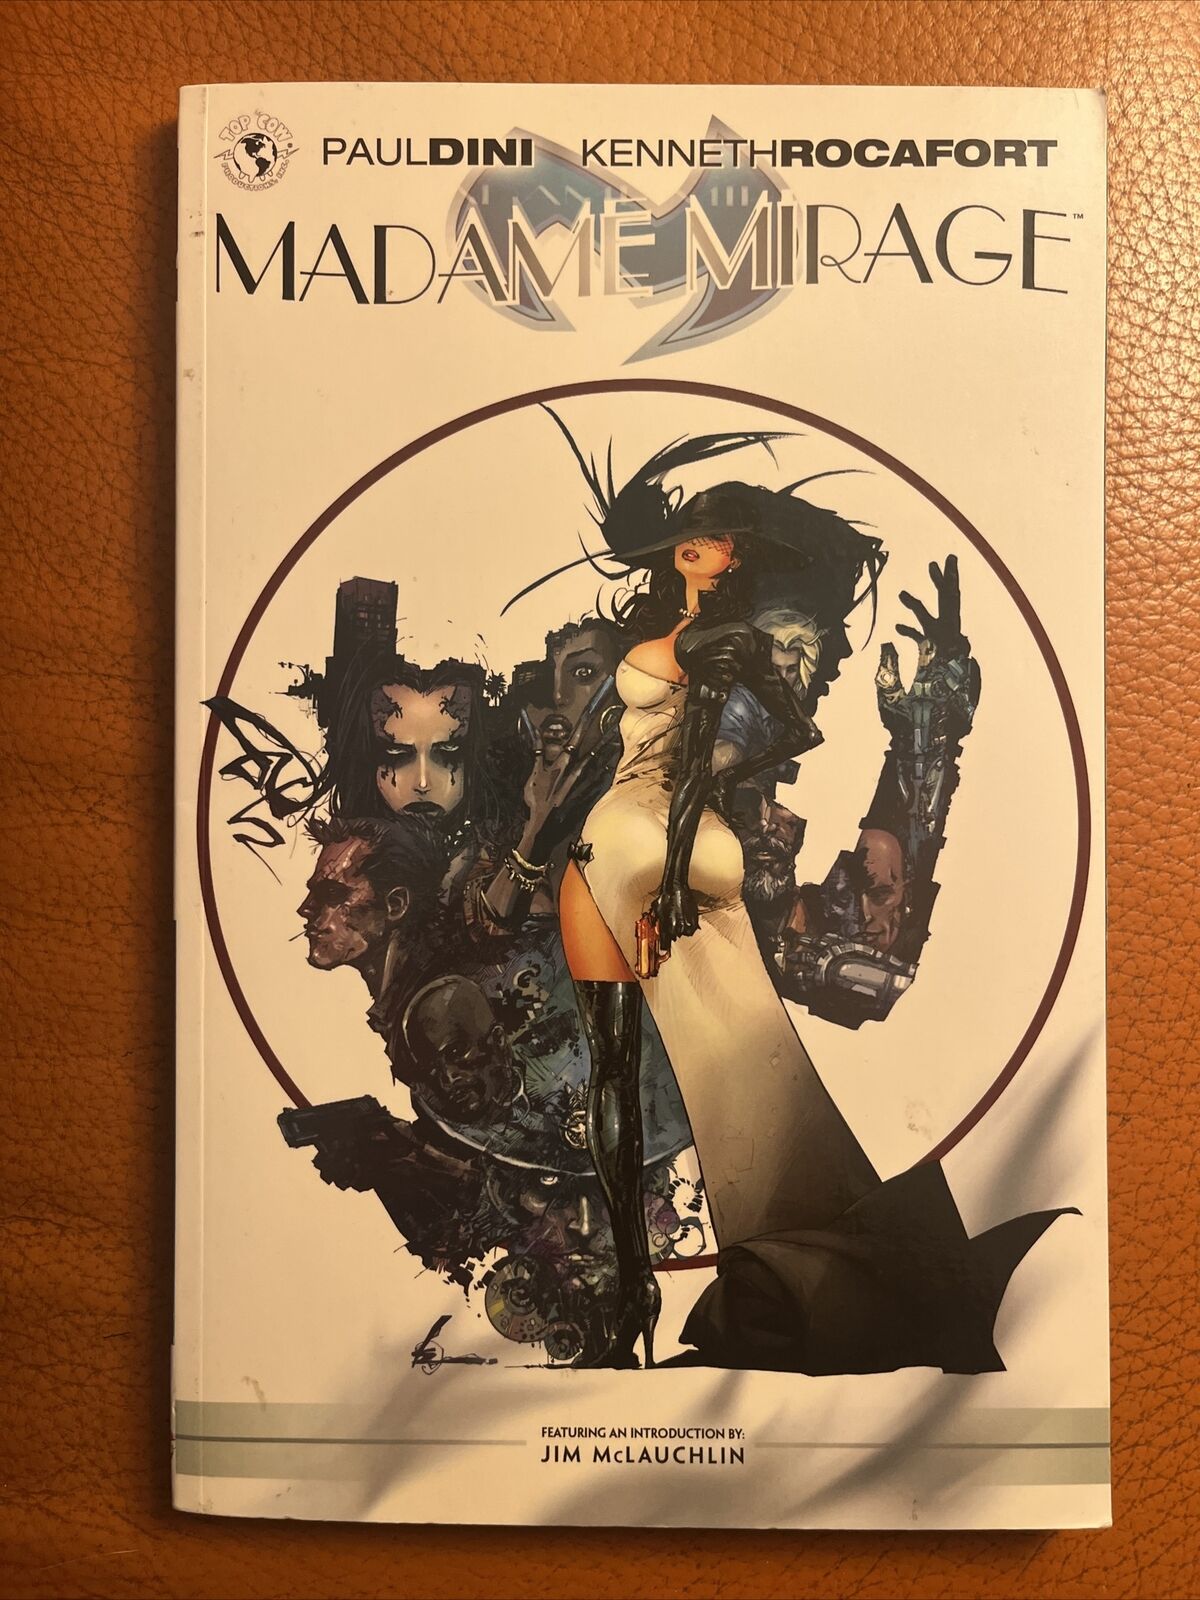 MADAME MIRAGE TP TPB Paul Dini Kenneth Rocafort Image Top Cow VG+